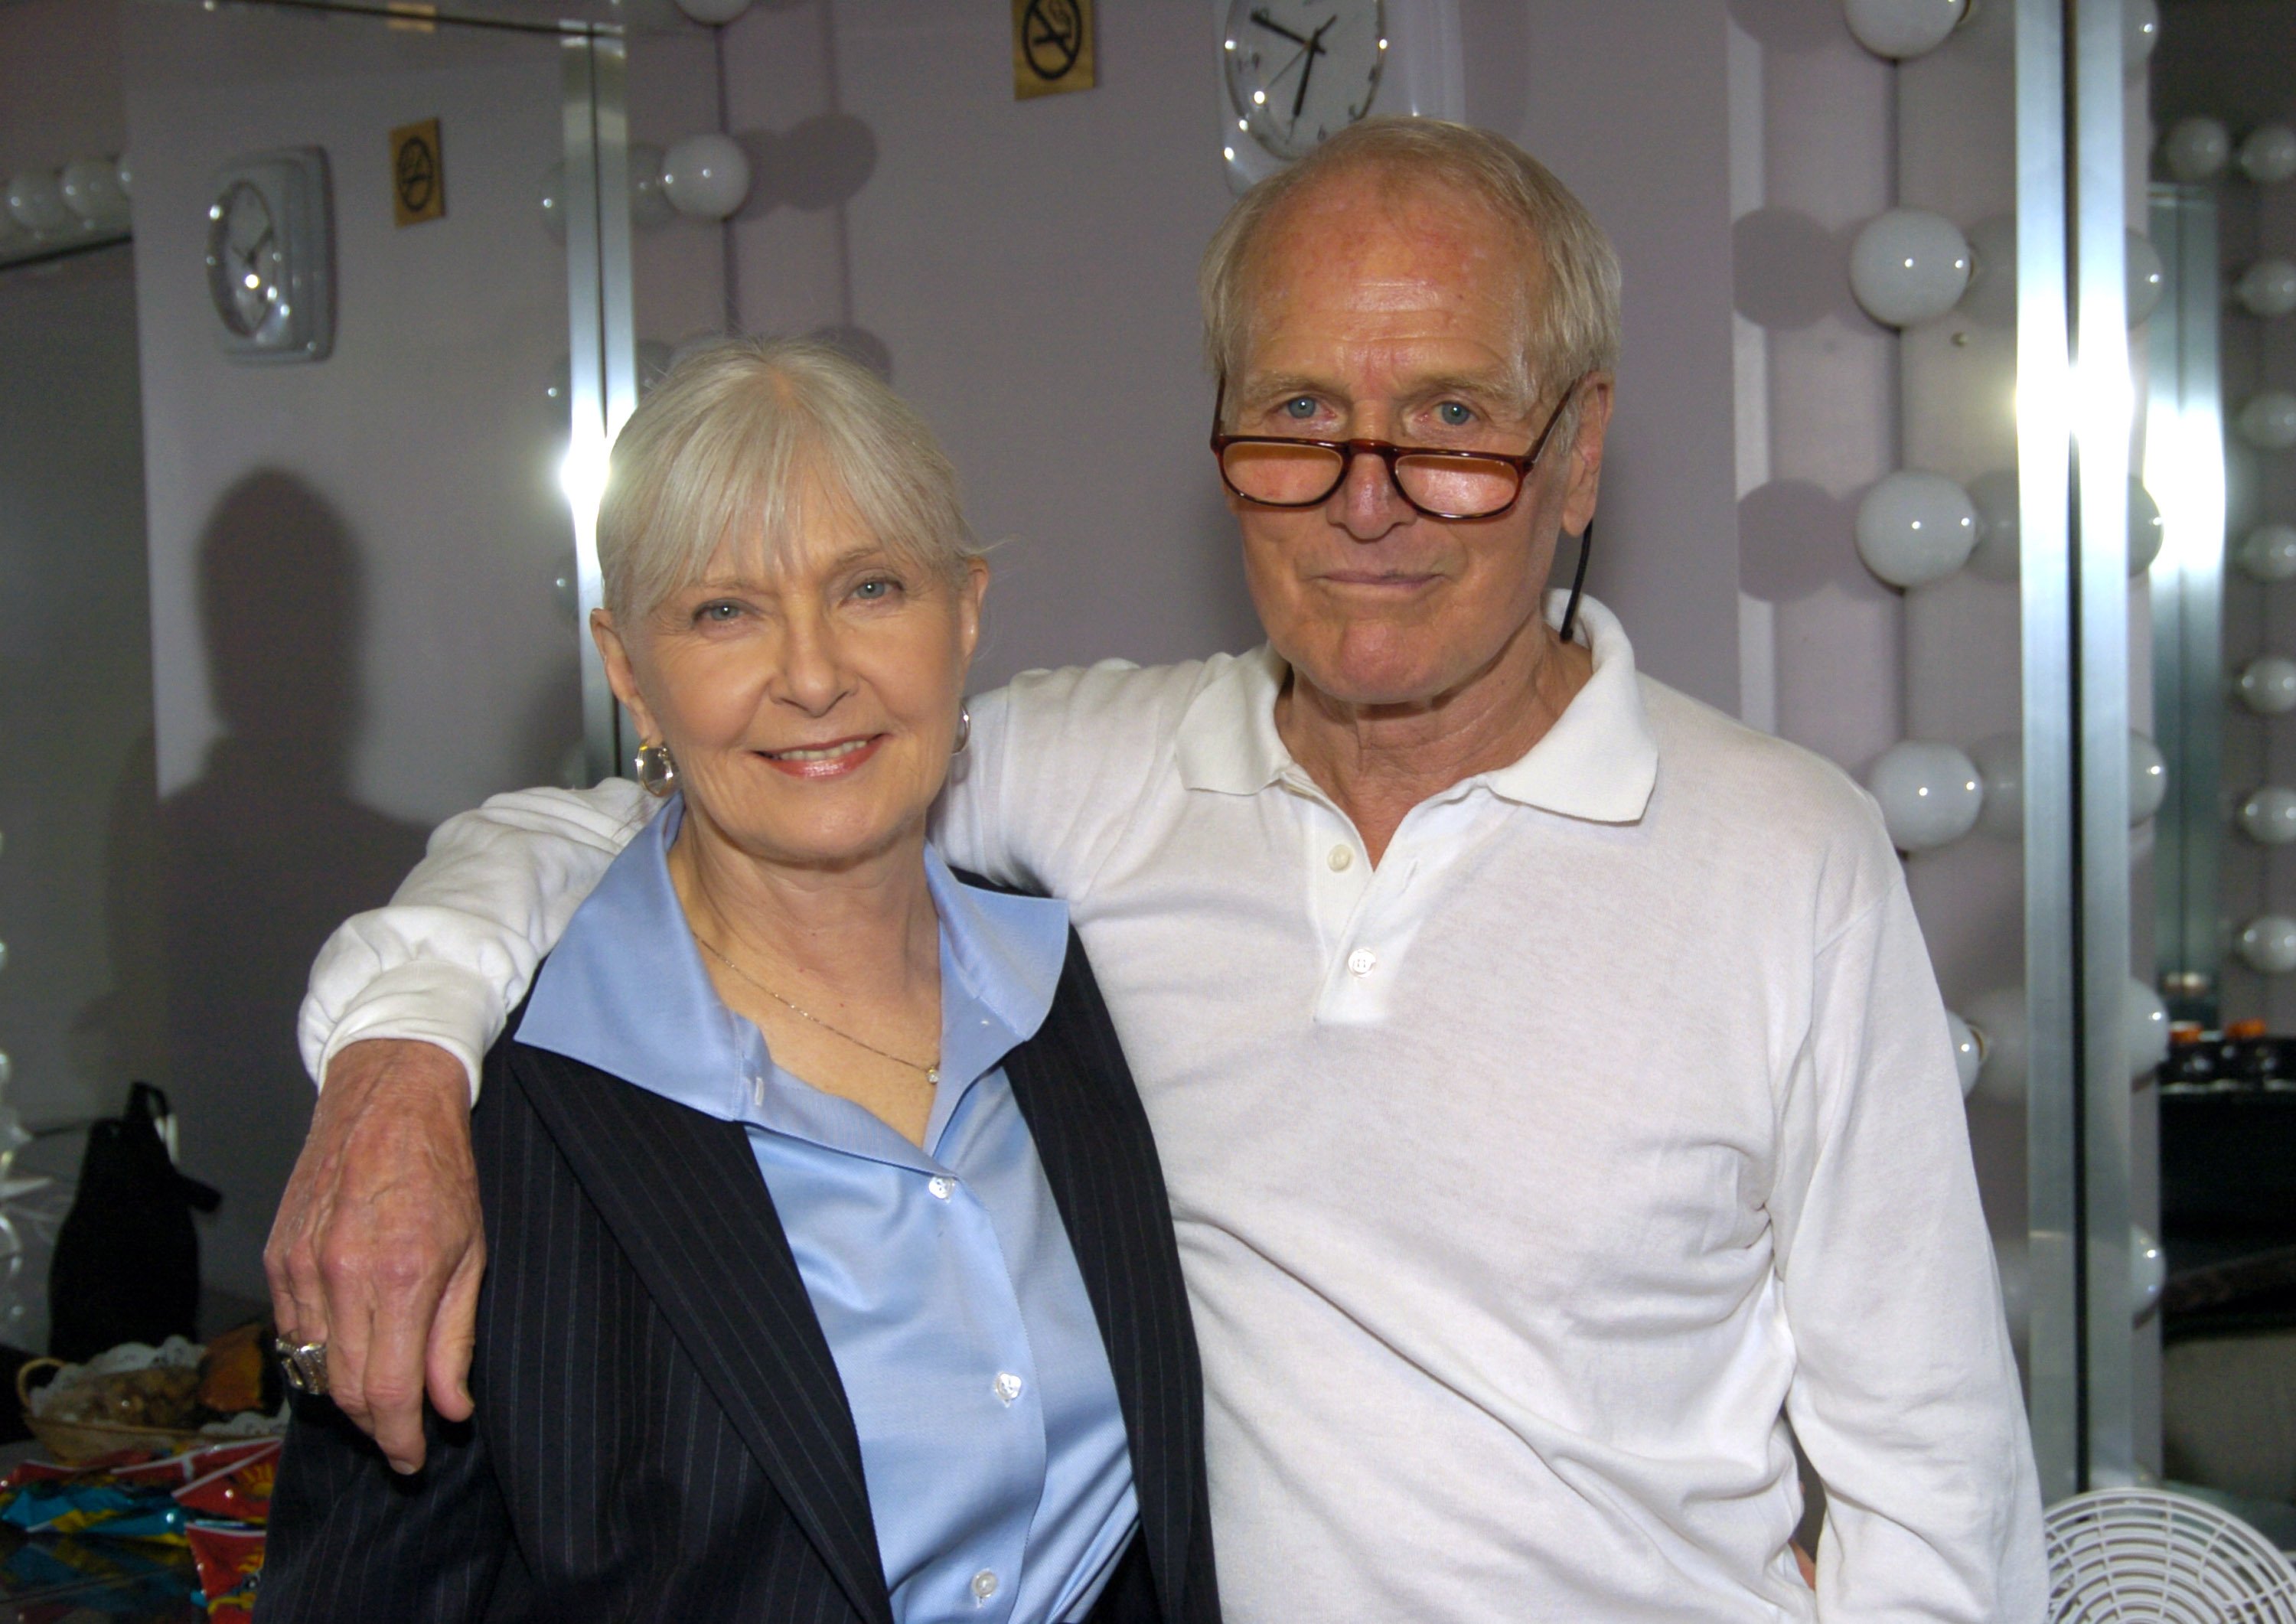 Joanne Woodward and Paul Newman at Radio City Music Hall for "A Change Is Going To Come: The Concert for John Kerry" July 8, 2004 in New York City. / Source: Getty Images